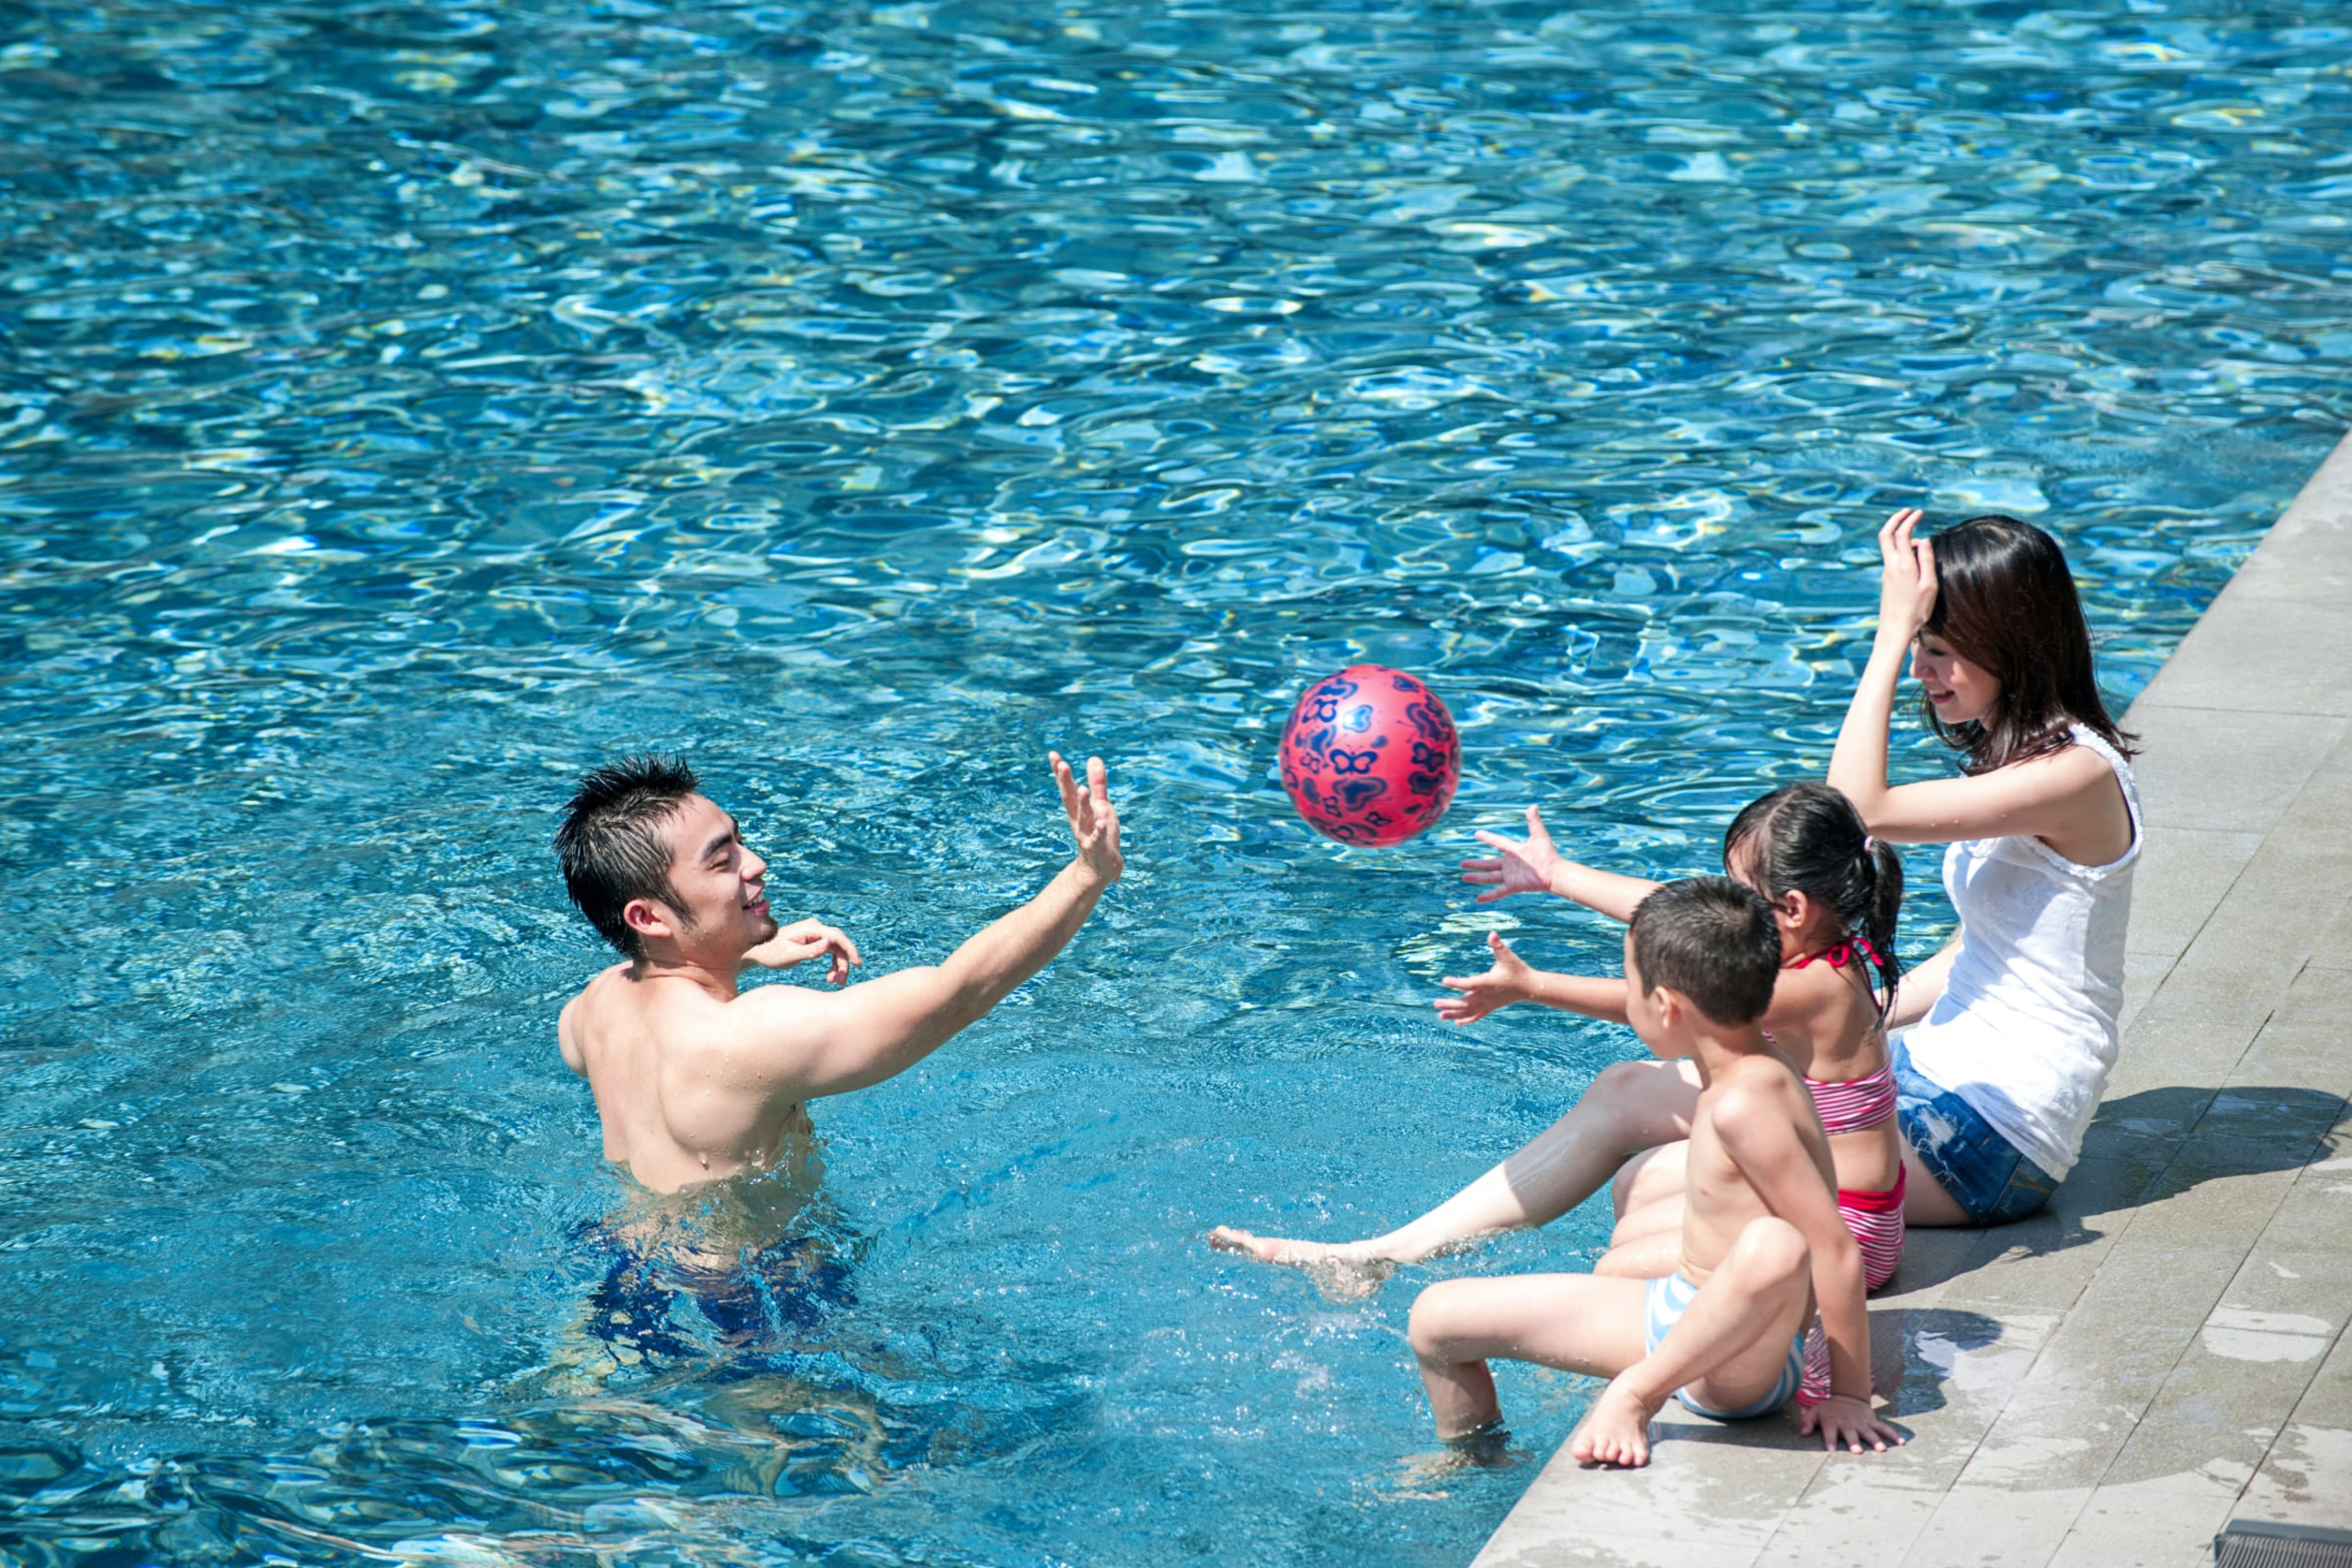 A family of 4 playing in the pool with a ball.